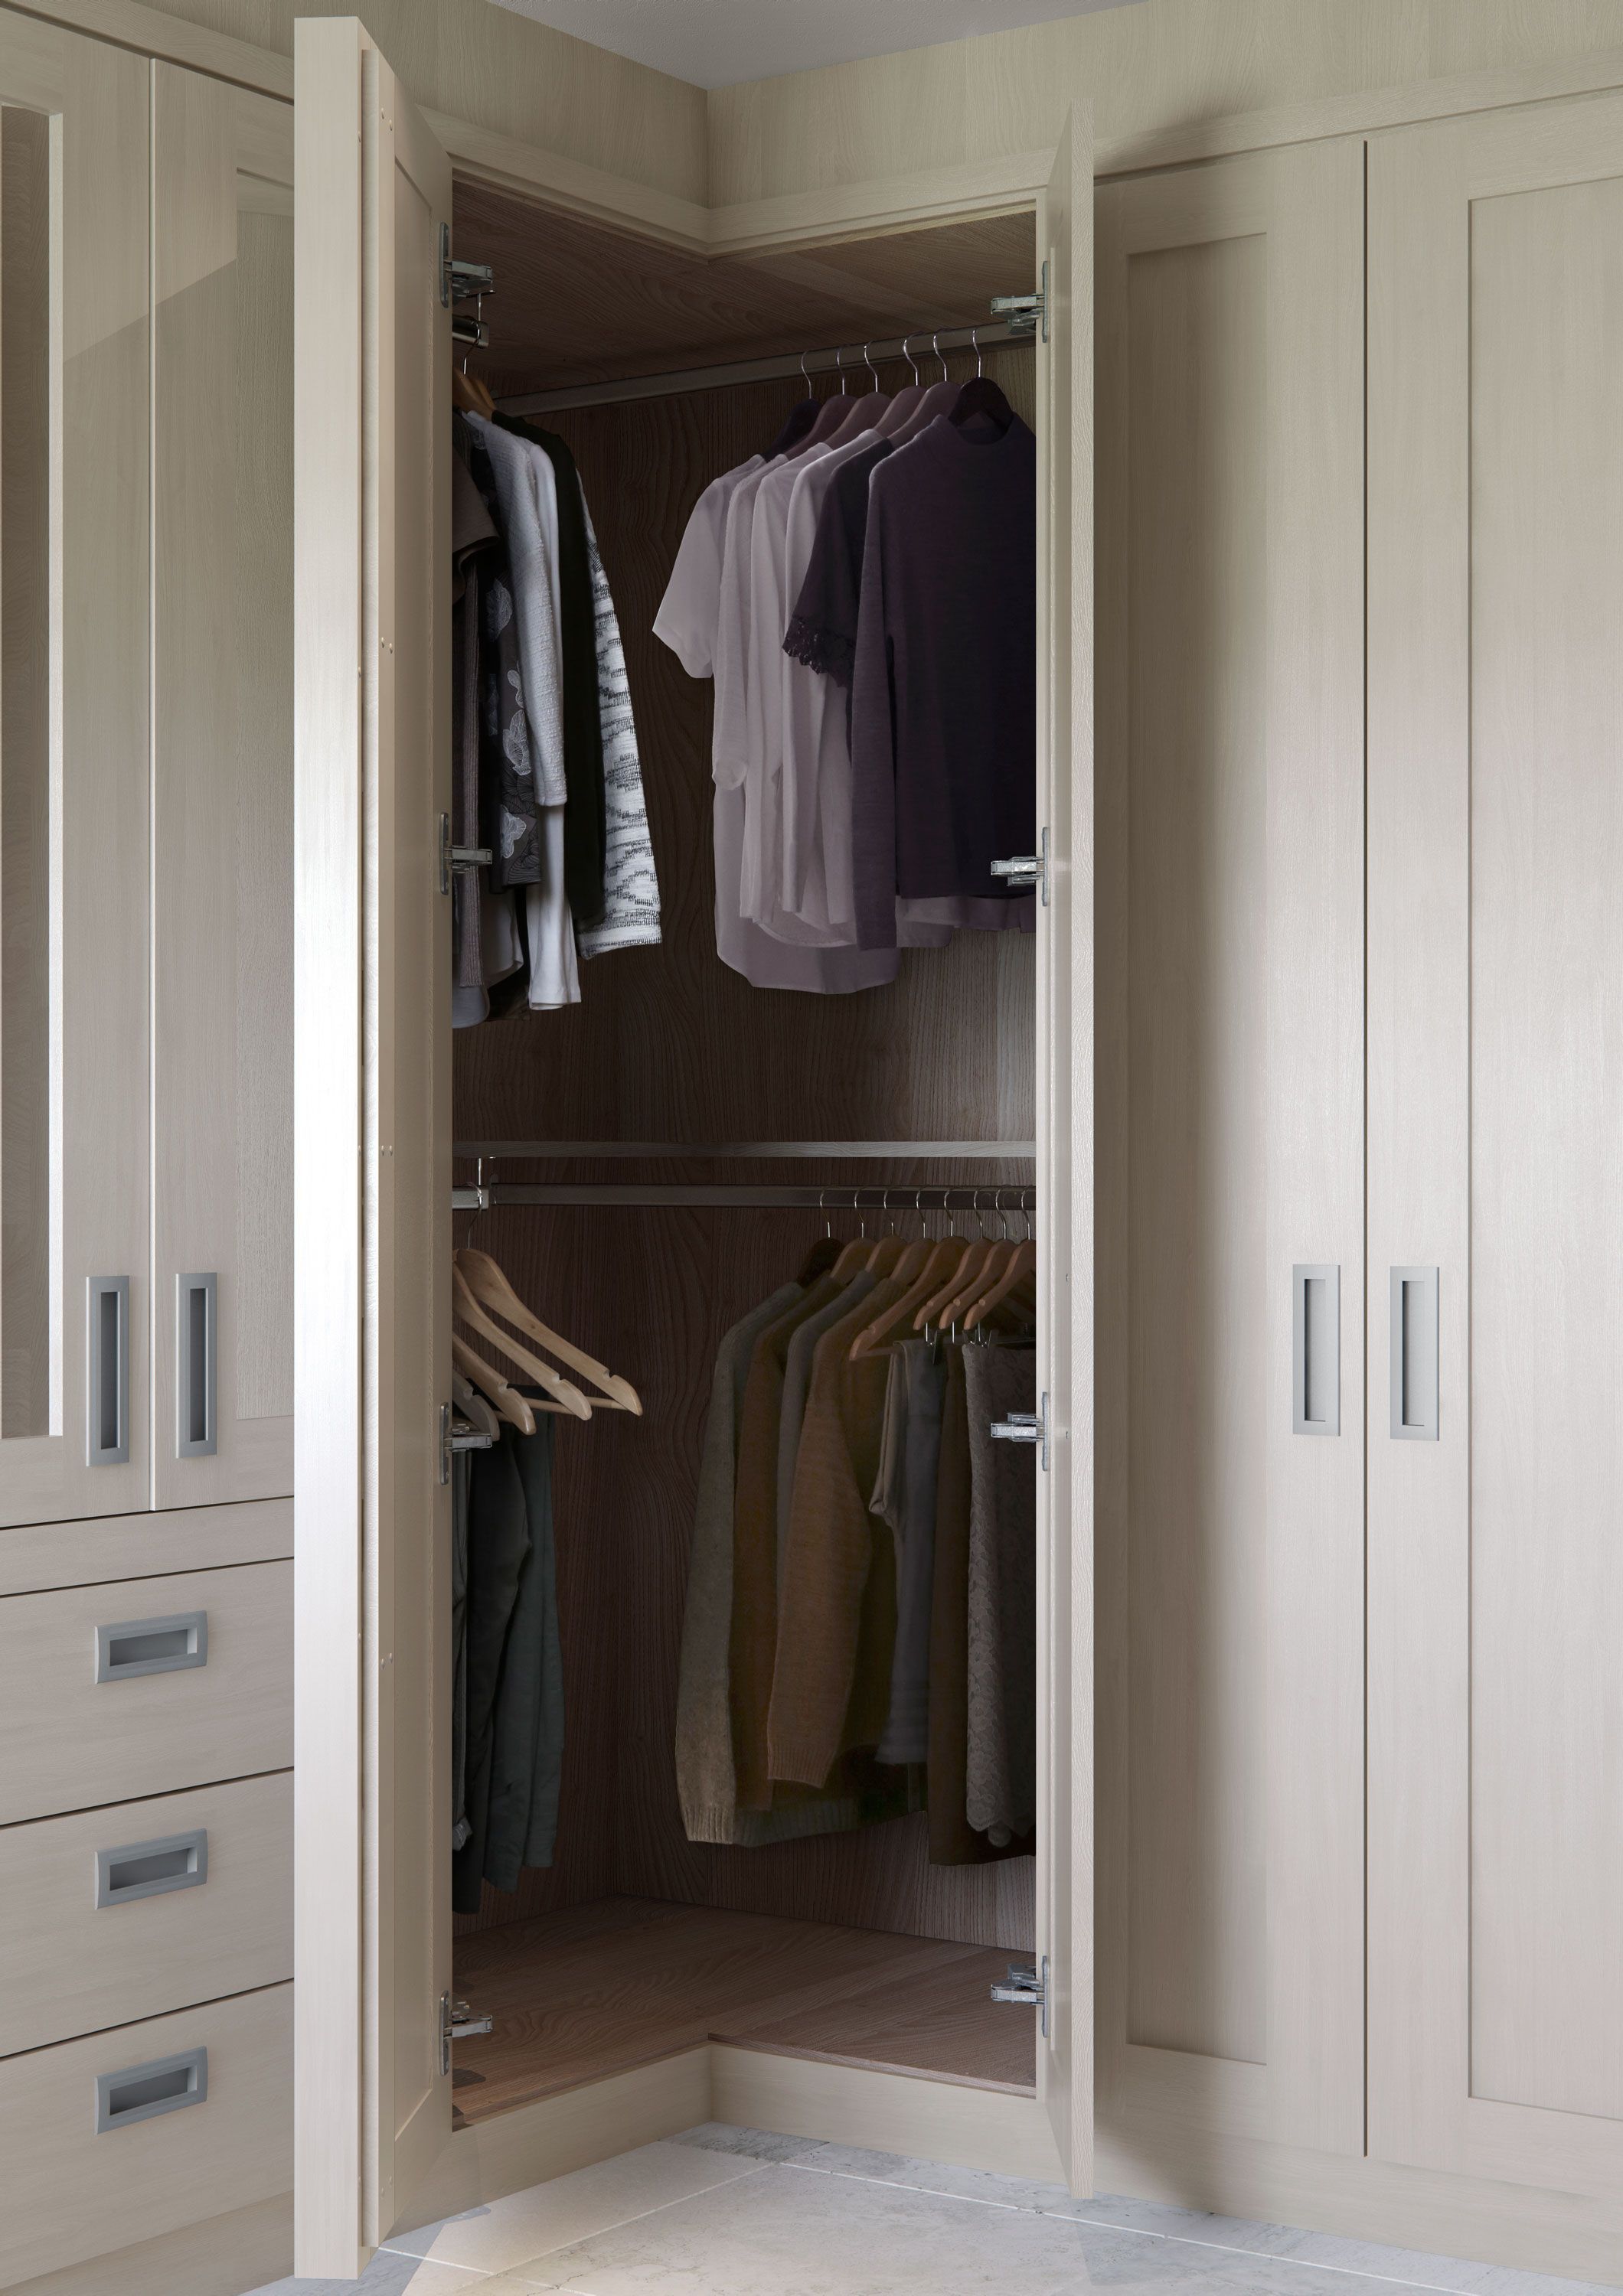 Make The Most Of The Corner Space With This Angled Double Hanging Rail. |  Corner Wardrobe, Corner Wardrobe Closet, Bedroom Built In Wardrobe With Wardrobes With Double Hanging Rail (Photo 2 of 15)